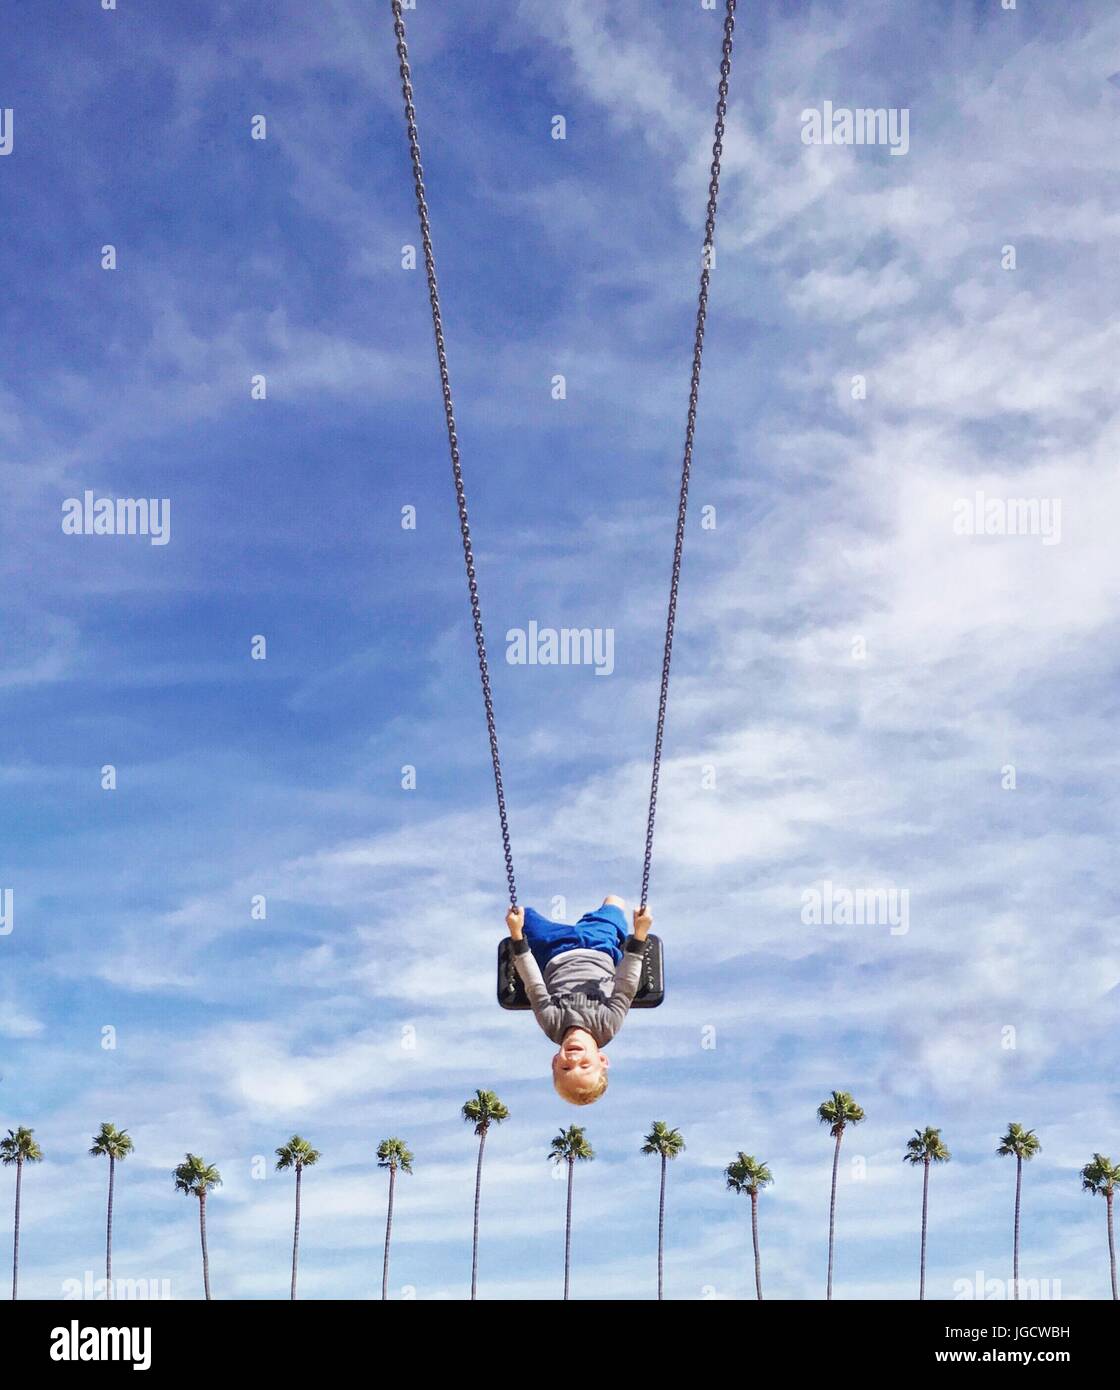 Boy swinging upside down on a swing over a row of palm trees, Orange County, California, United States Stock Photo